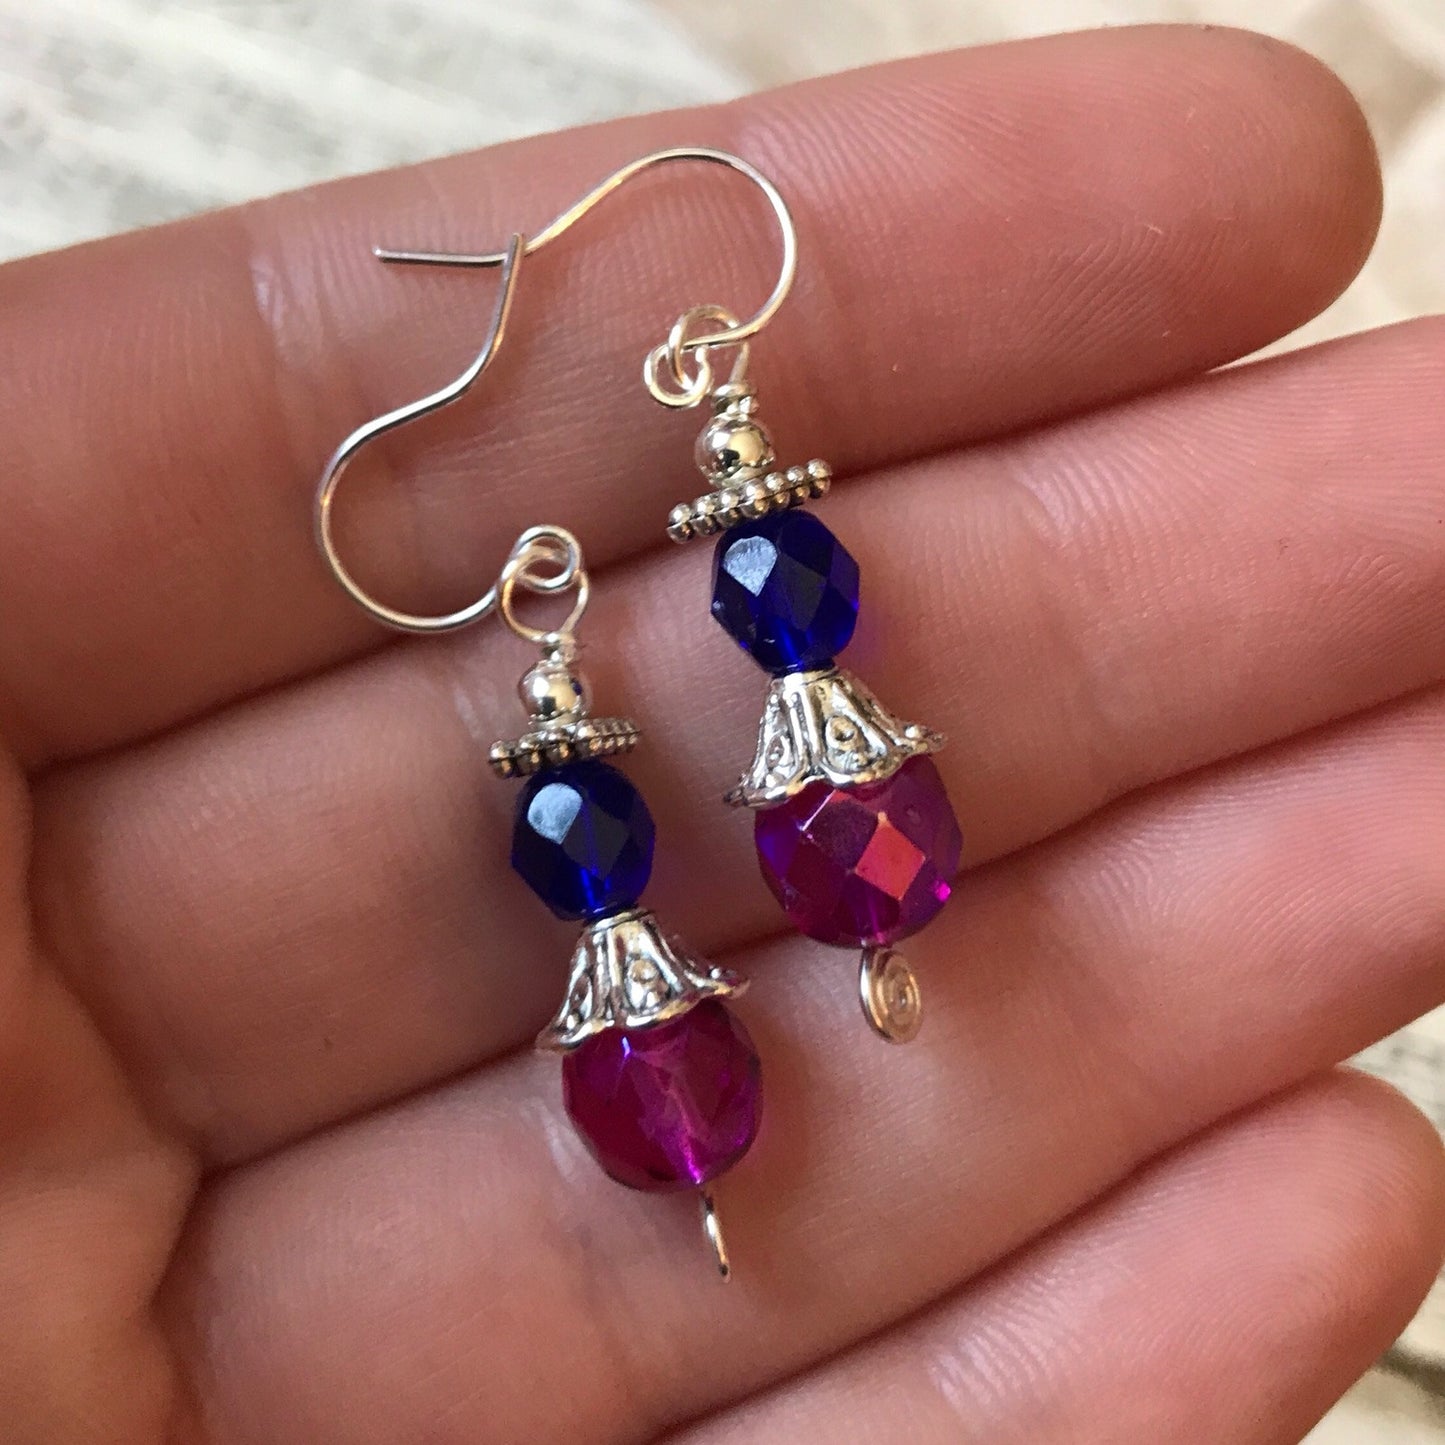 Tiny Evil Genius Earrings: *incoherent whine*